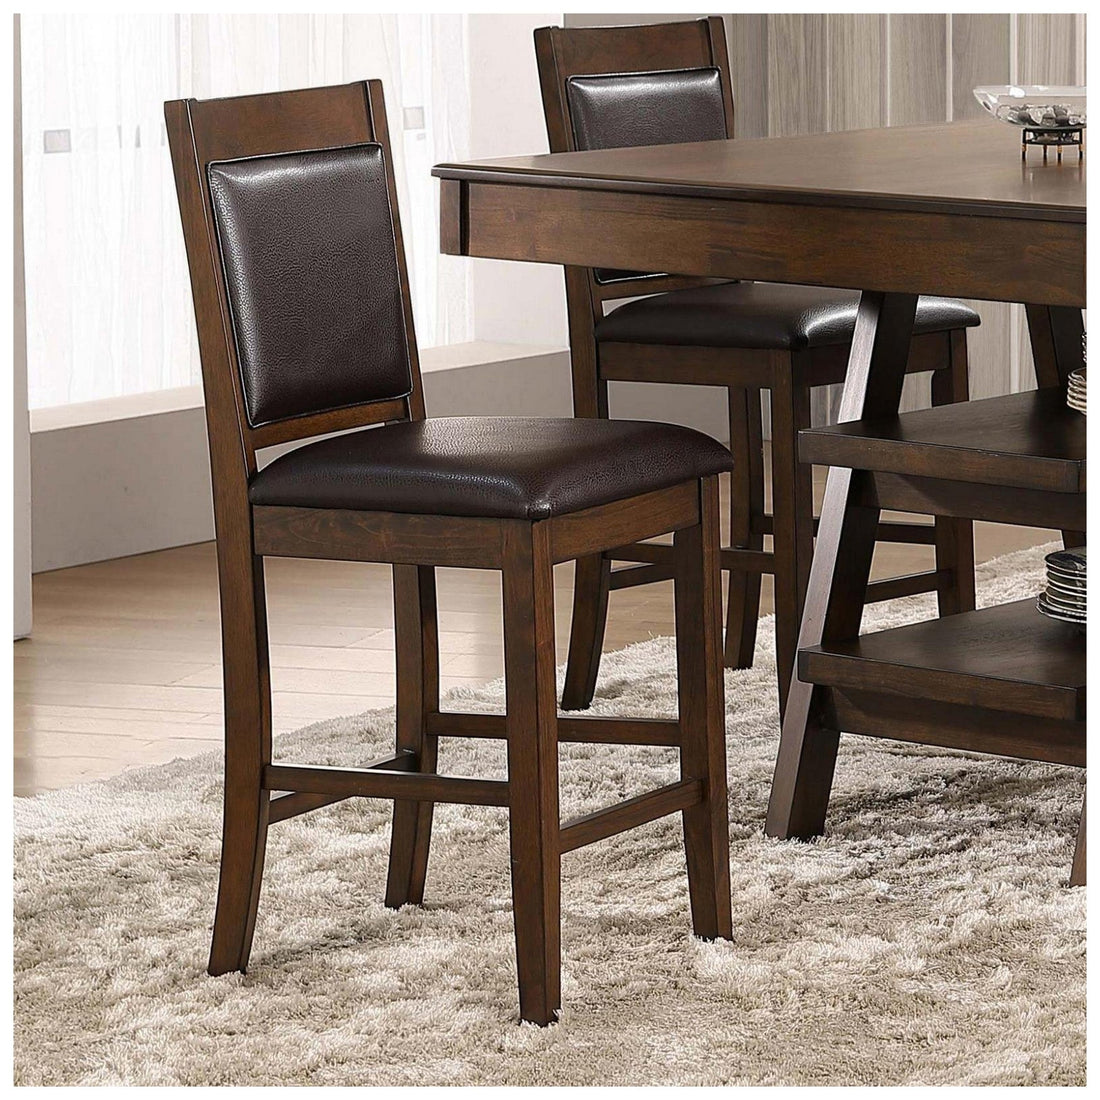 Dewey Upholstered Counter Height Chairs with Footrest (Set of 2) Brown and Walnut 115209